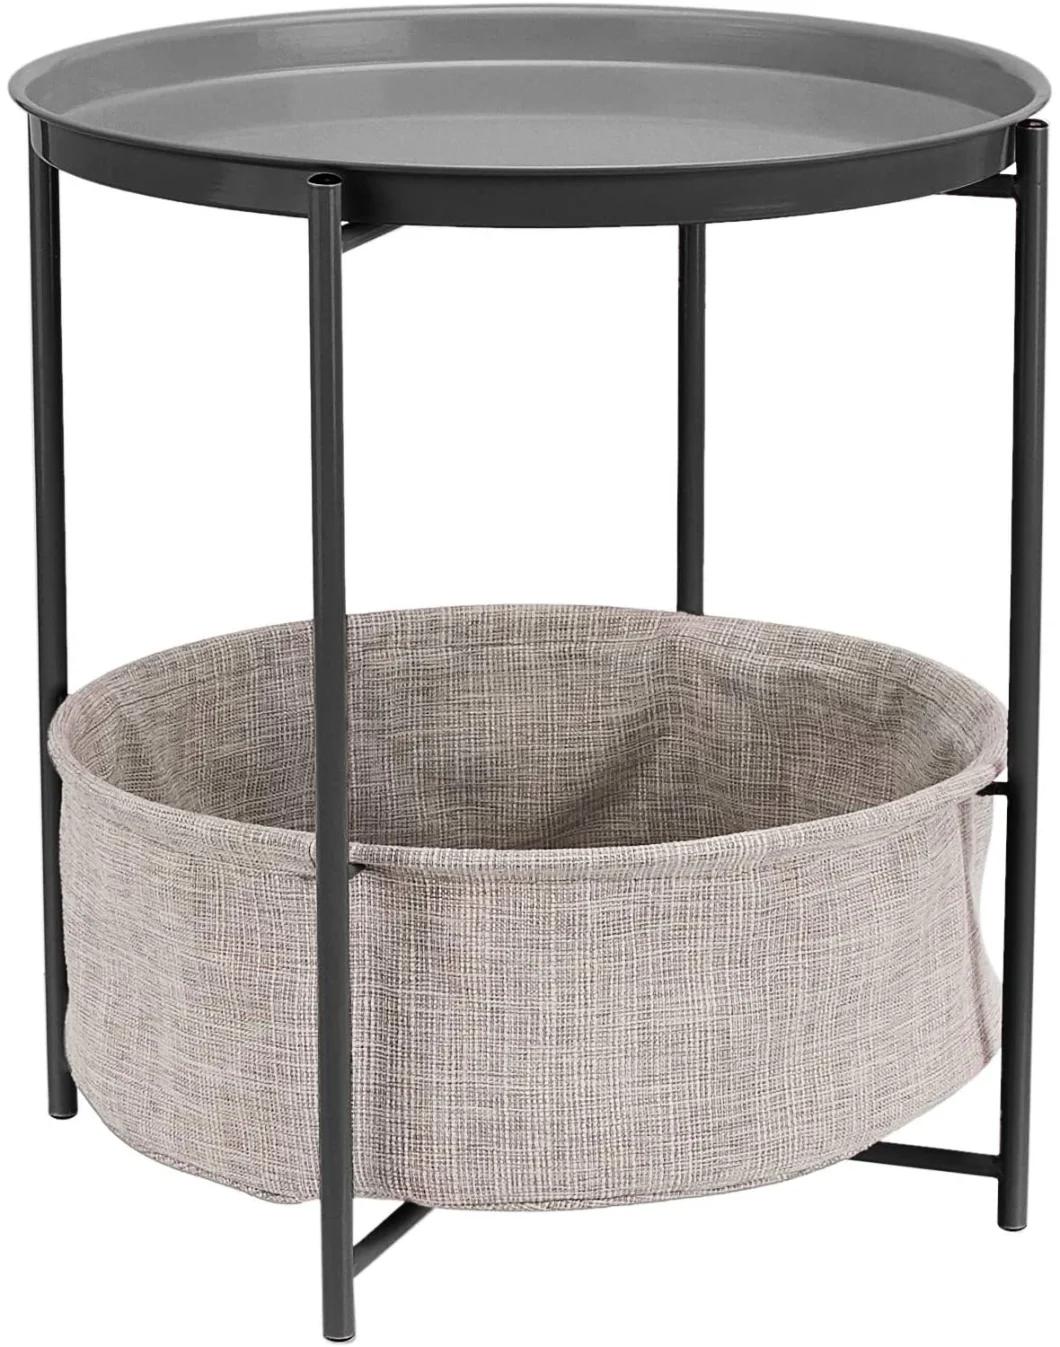 Modern Minimalistic Living Room Furniture Round Coffee Table with Storage